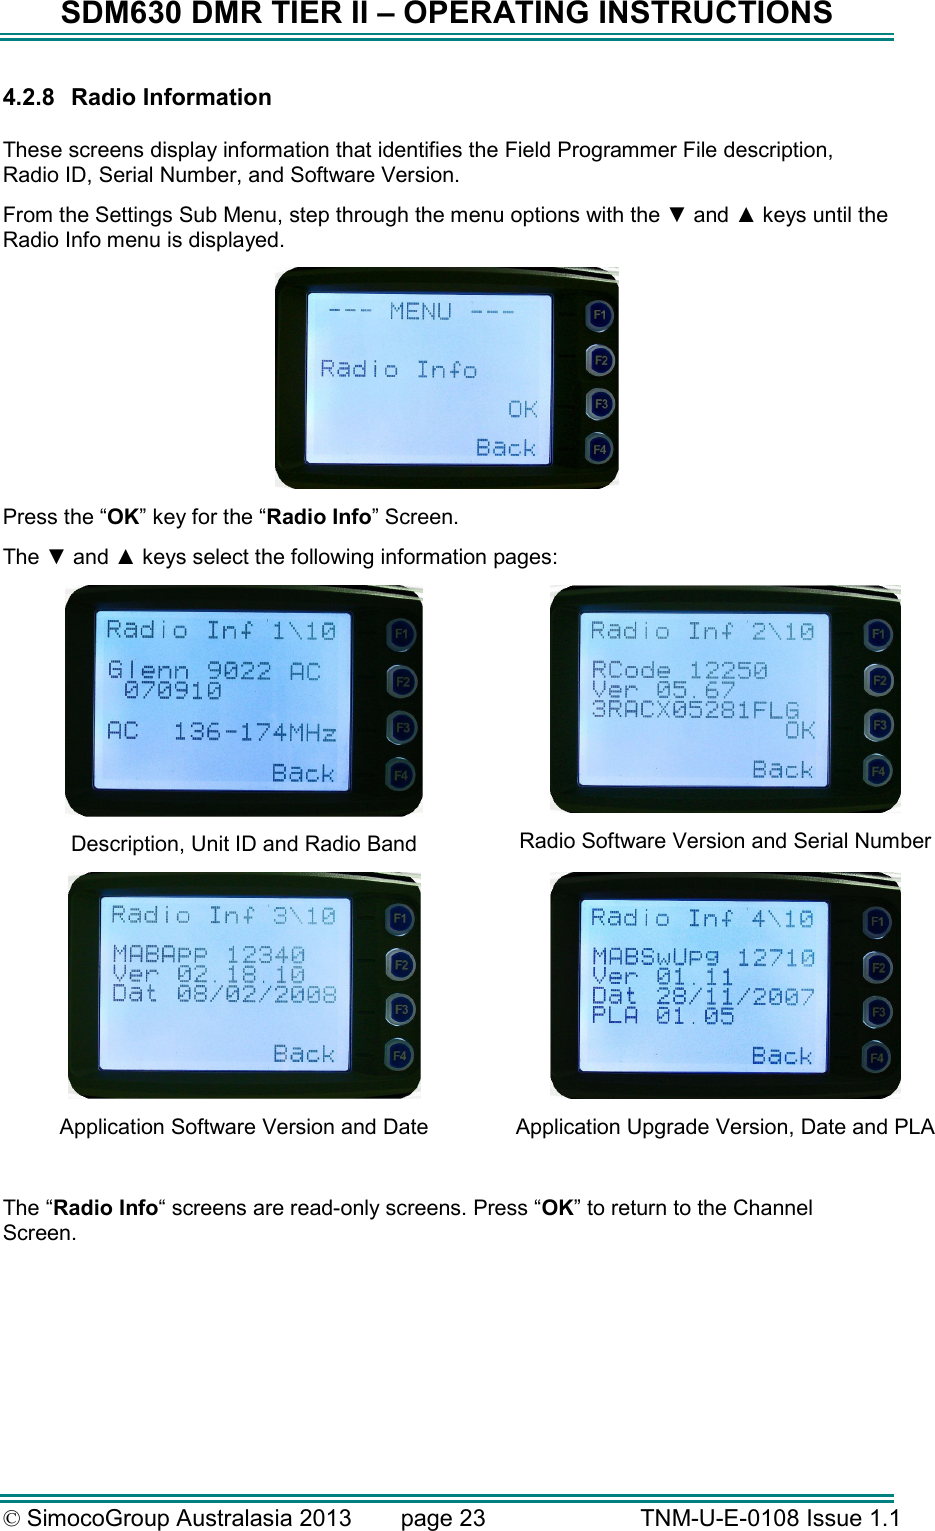 SDM630 DMR TIER II – OPERATING INSTRUCTIONS © SimocoGroup Australasia 2013   page 23   TNM-U-E-0108 Issue 1.1 4.2.8  Radio Information  These screens display information that identifies the Field Programmer File description, Radio ID, Serial Number, and Software Version.   From the Settings Sub Menu, step through the menu options with the ▼ and ▲ keys until the Radio Info menu is displayed.  Press the “OK” key for the “Radio Info” Screen. The ▼ and ▲ keys select the following information pages:  Description, Unit ID and Radio Band  Radio Software Version and Serial Number  Application Software Version and Date  Application Upgrade Version, Date and PLA   The “Radio Info“ screens are read-only screens. Press “OK” to return to the Channel Screen. 